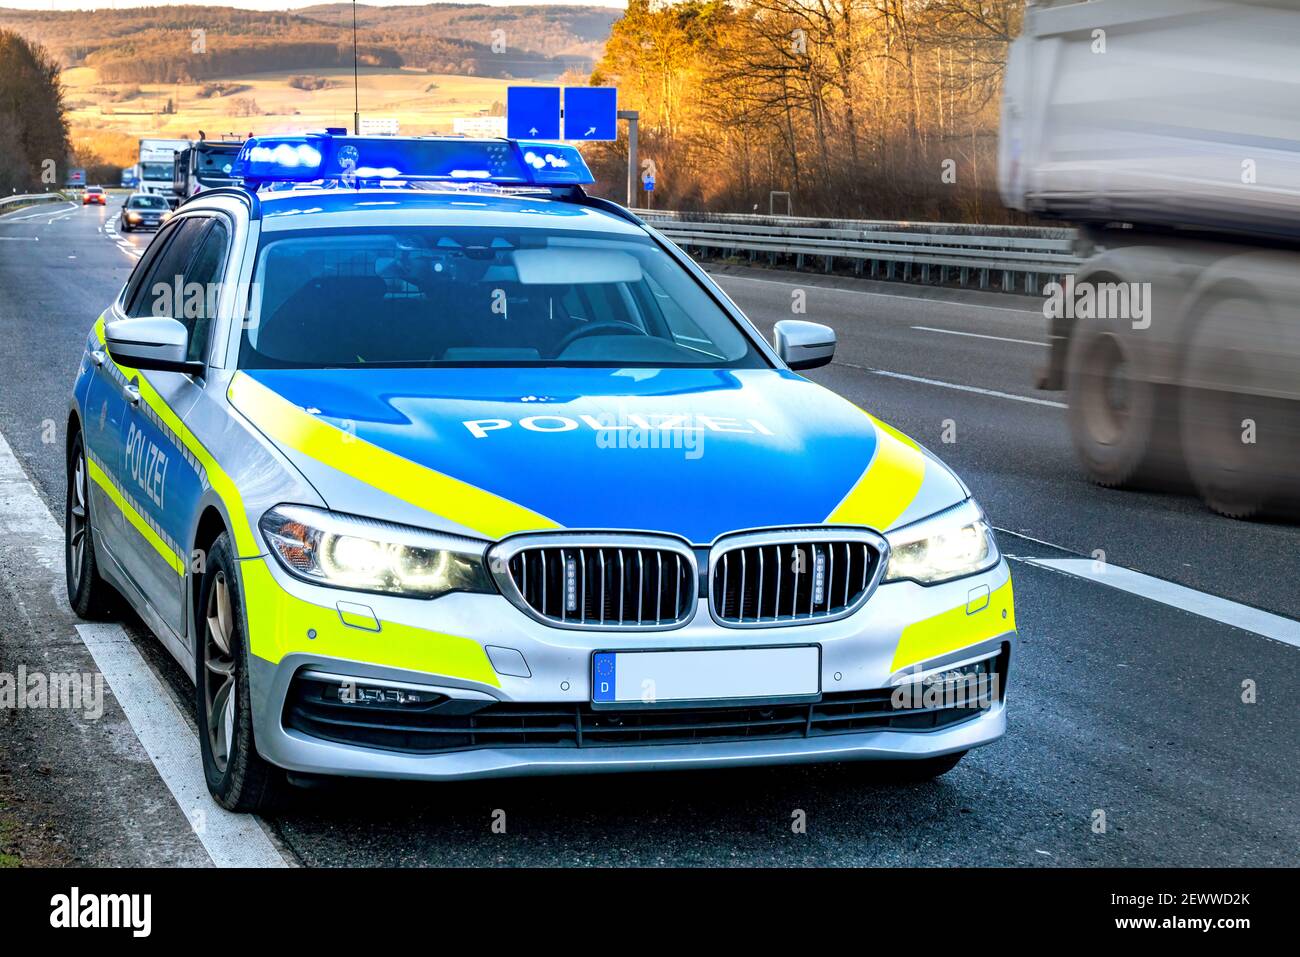 Police vehicle with blue lights in action on a motorway in Germany Stock Photo